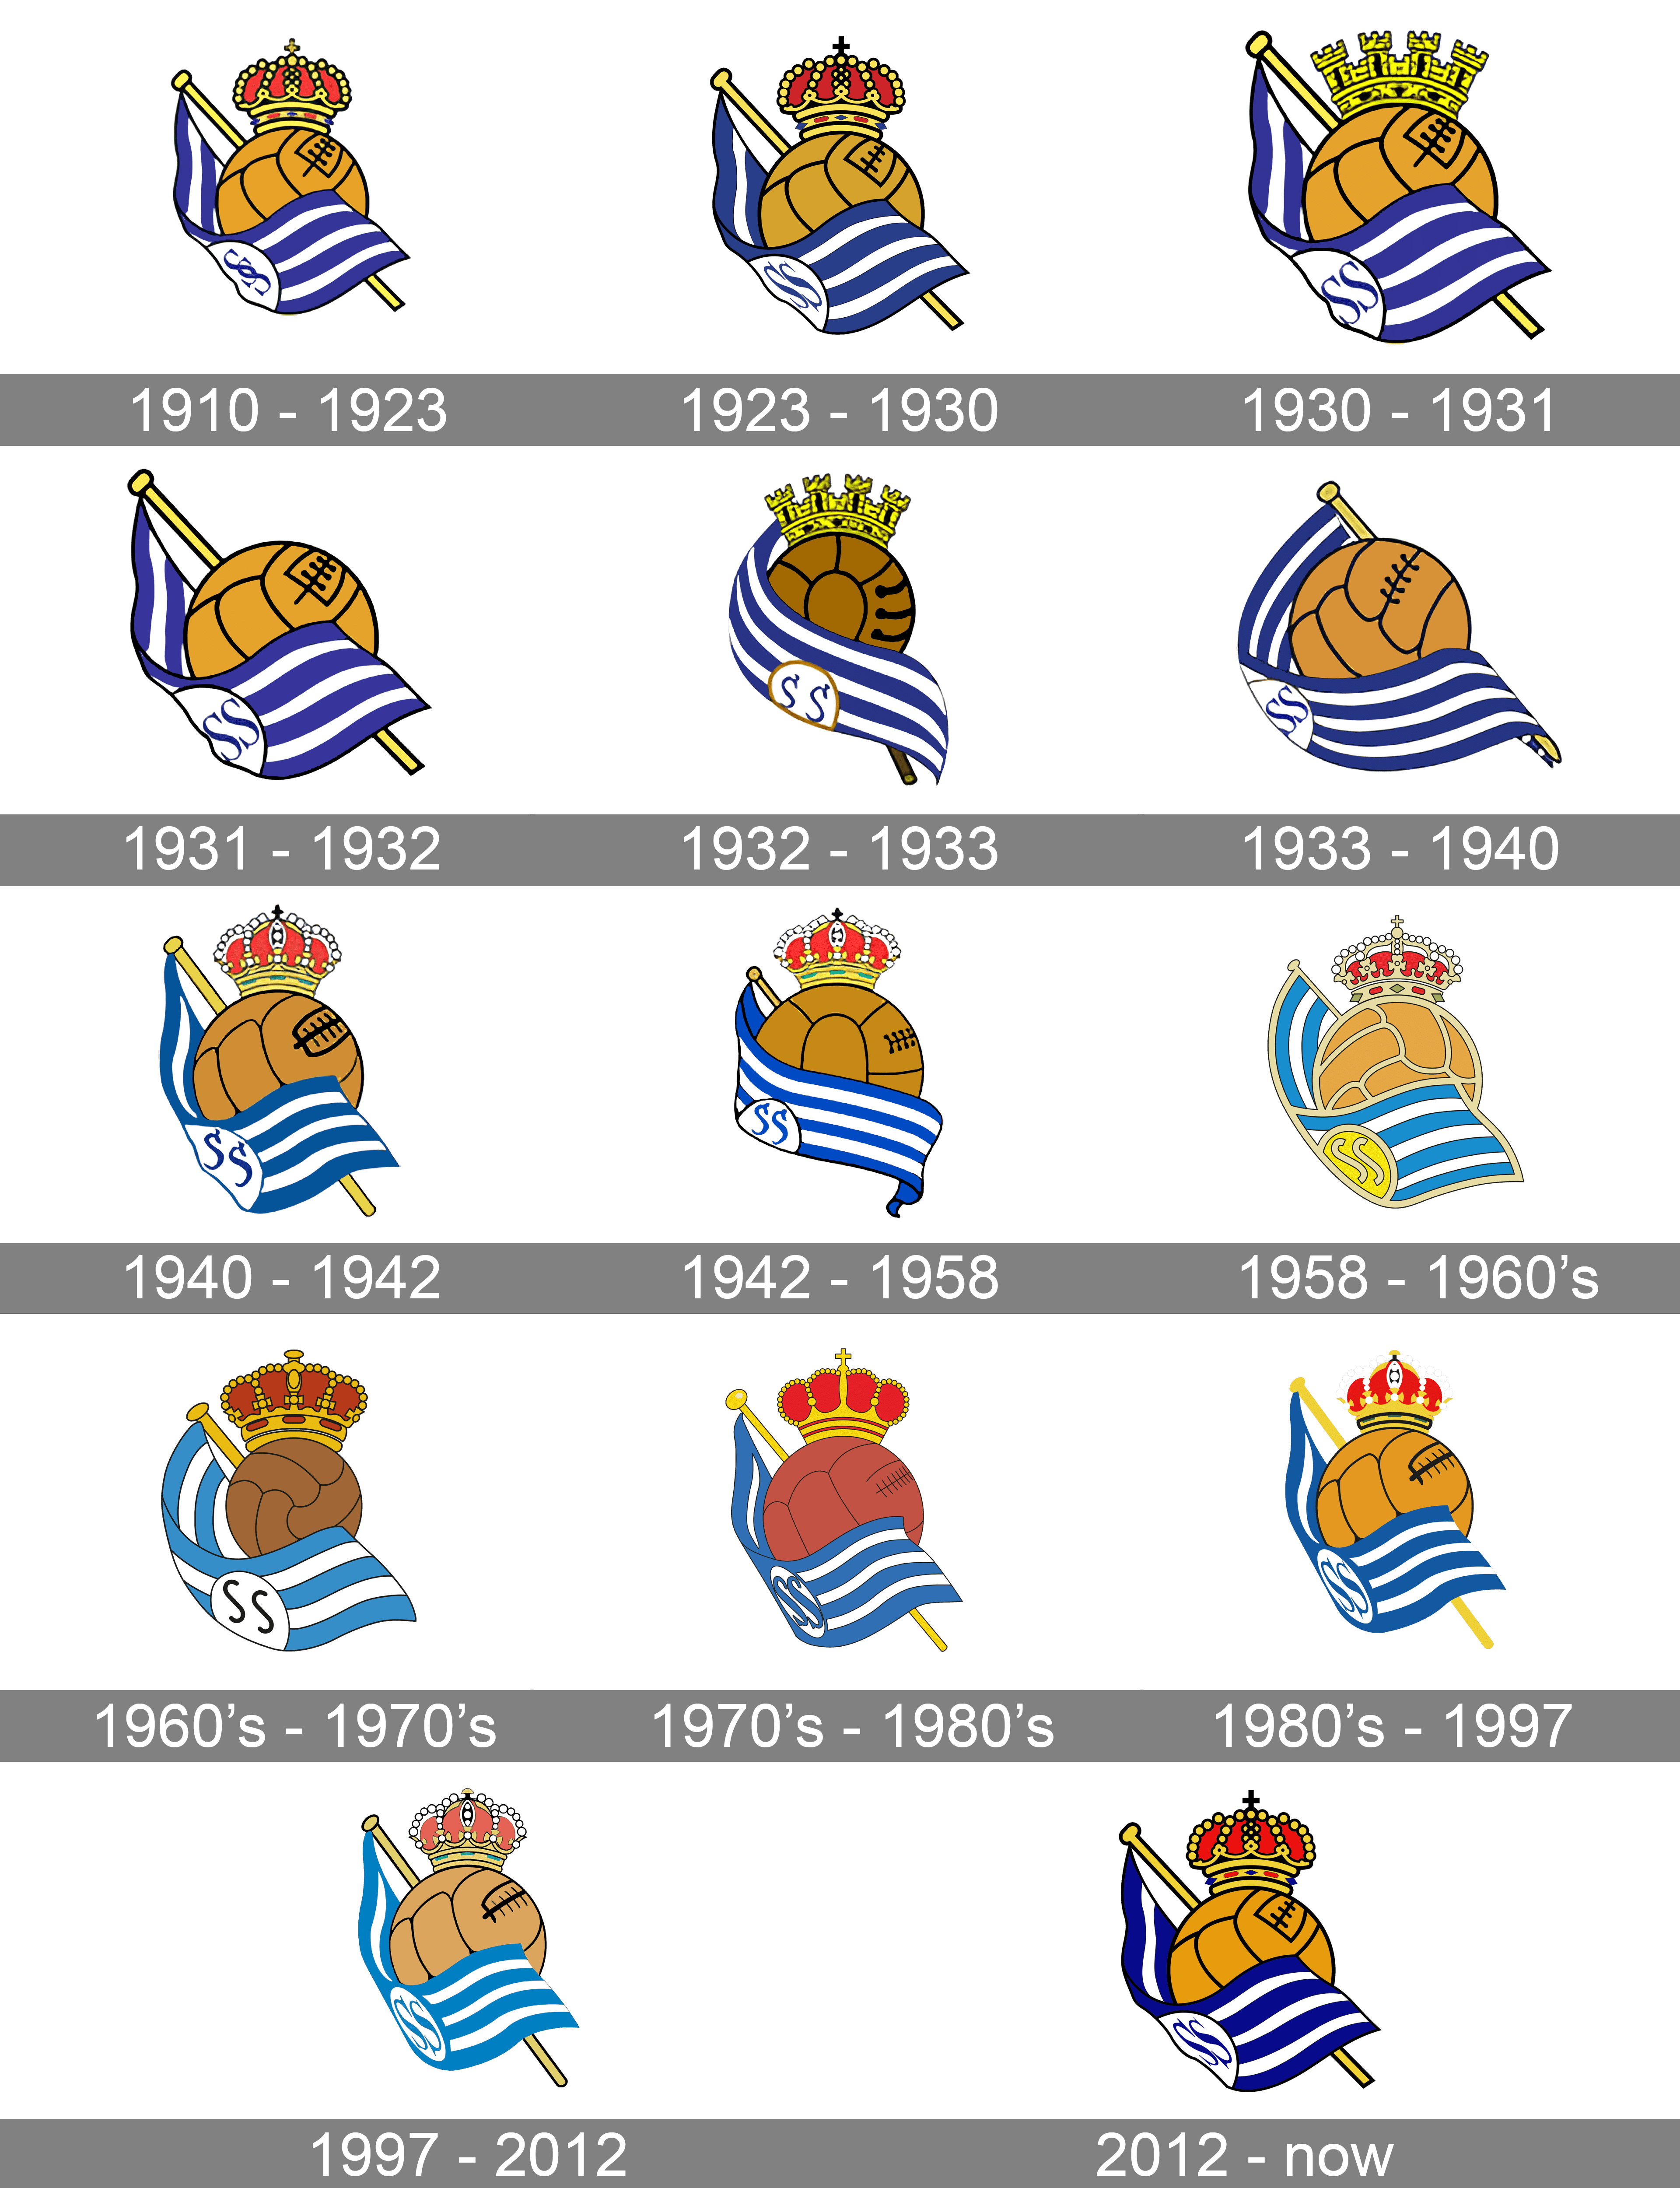 Where is real sociedad from